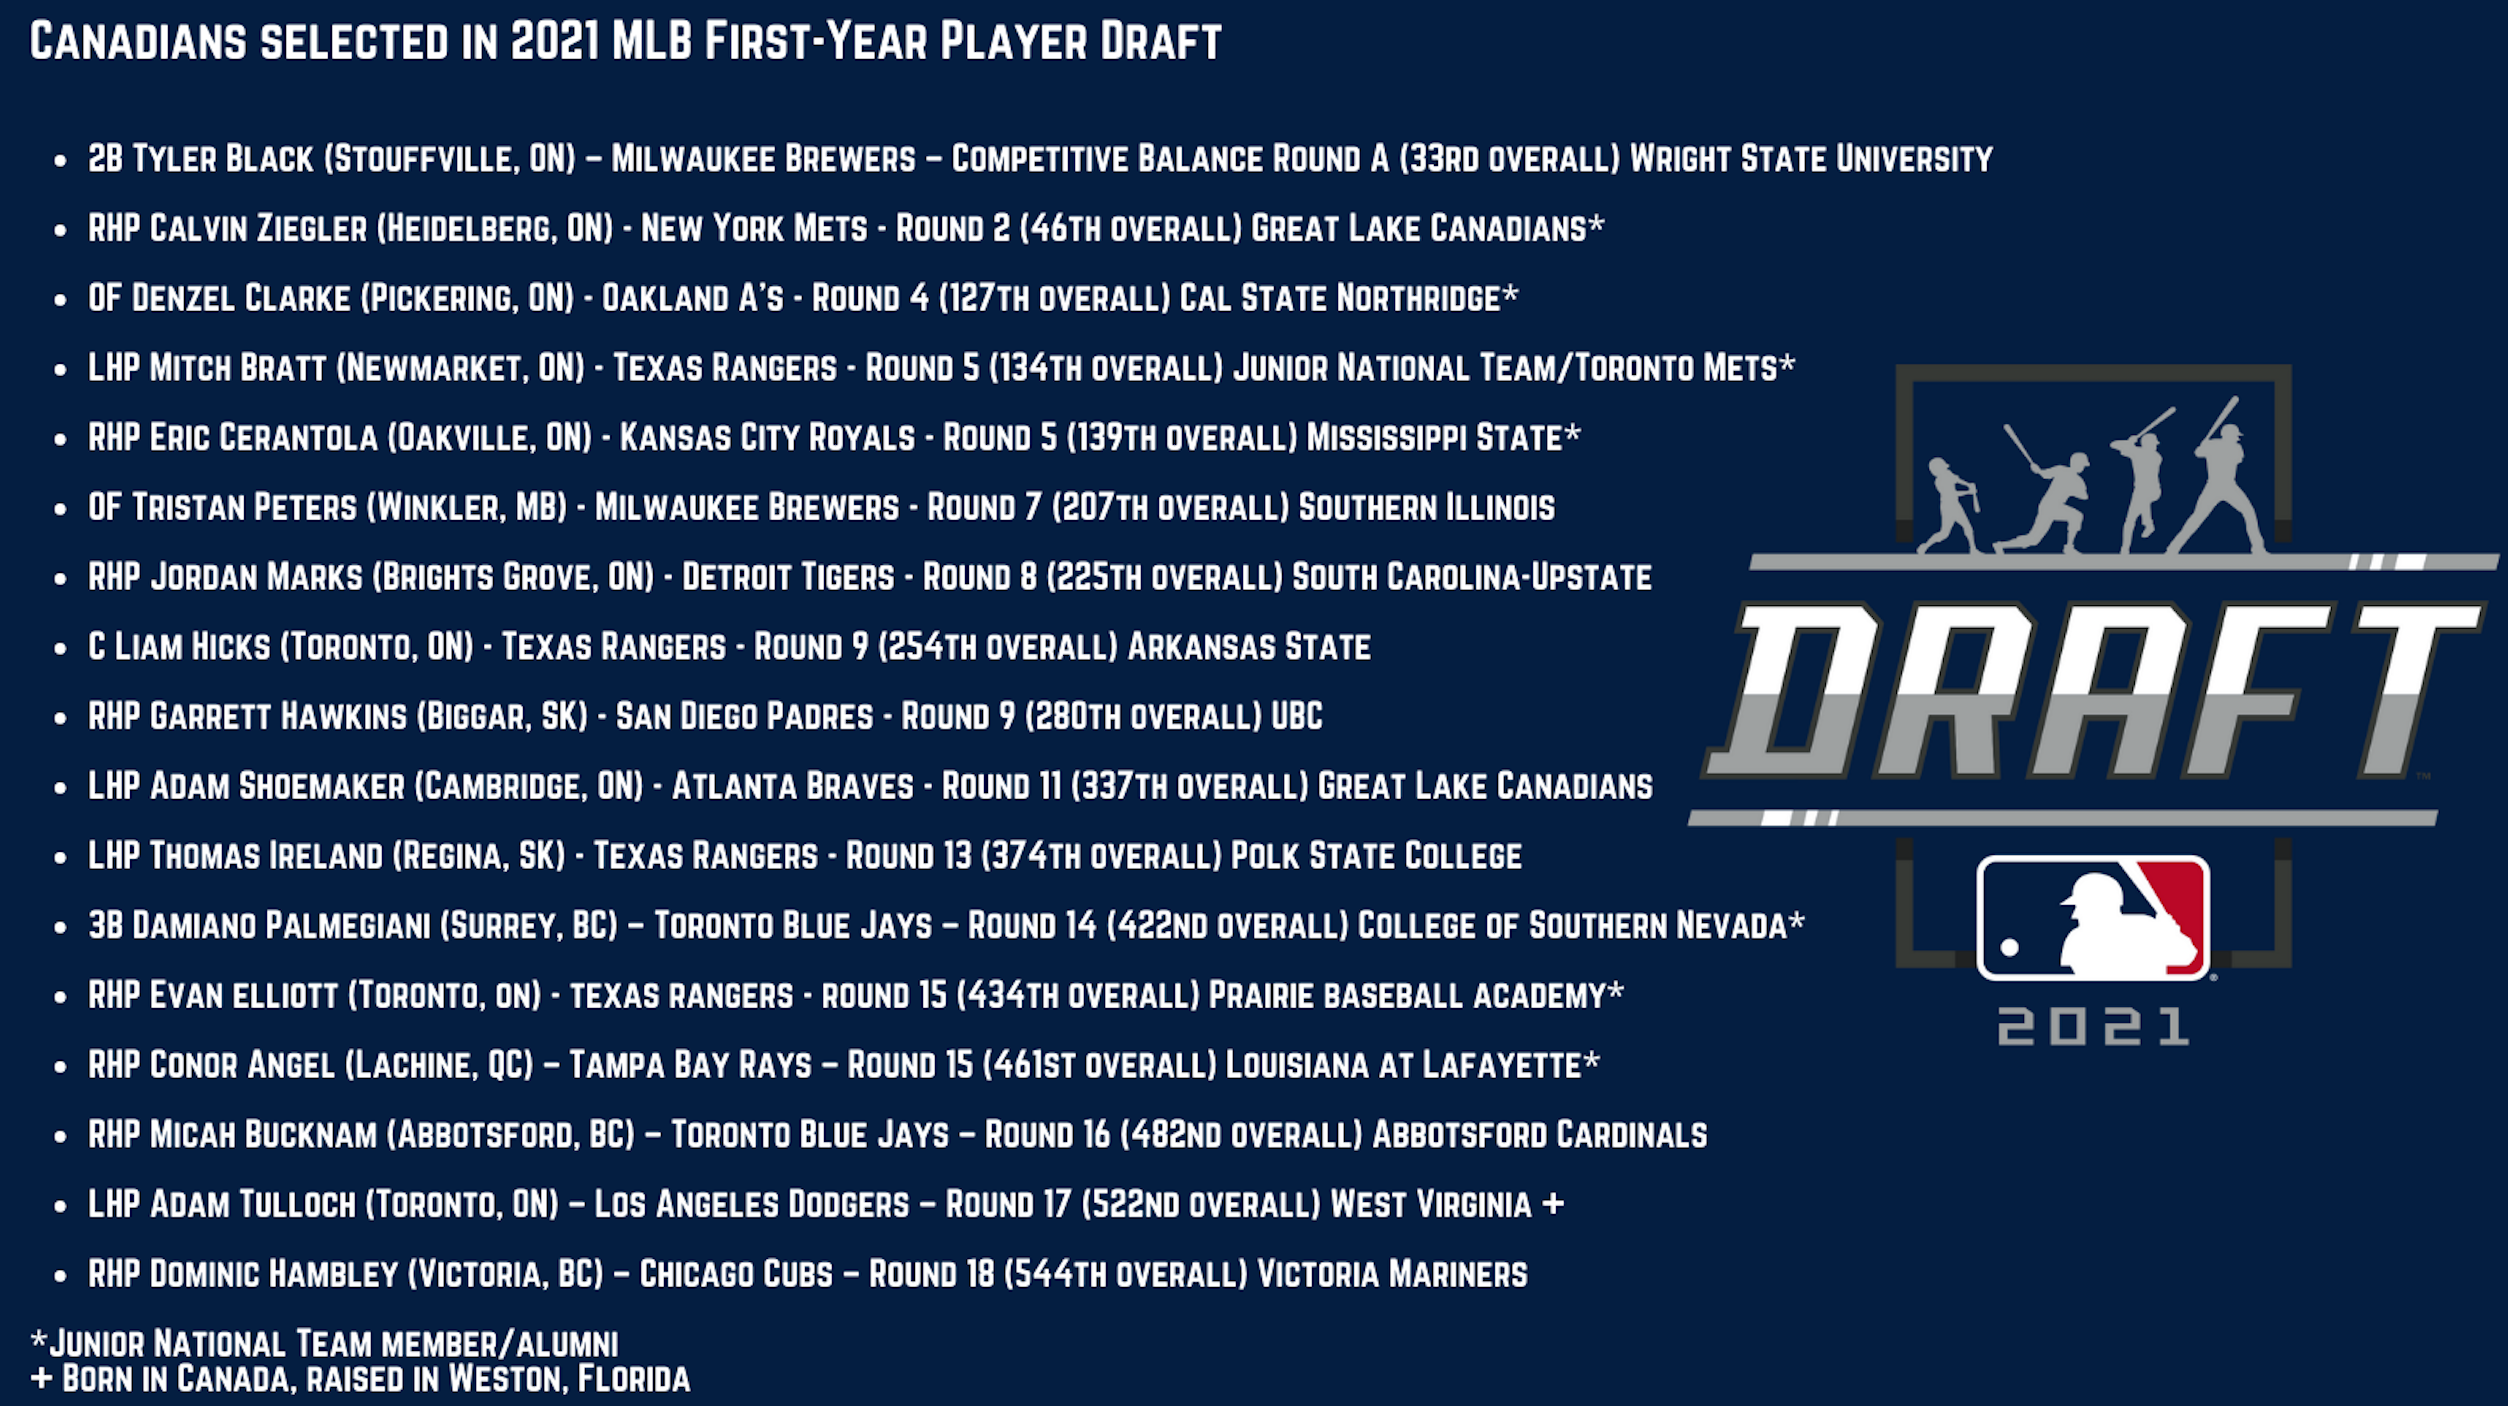 Canadians selected in 2021 MLB First-Year Player Draft